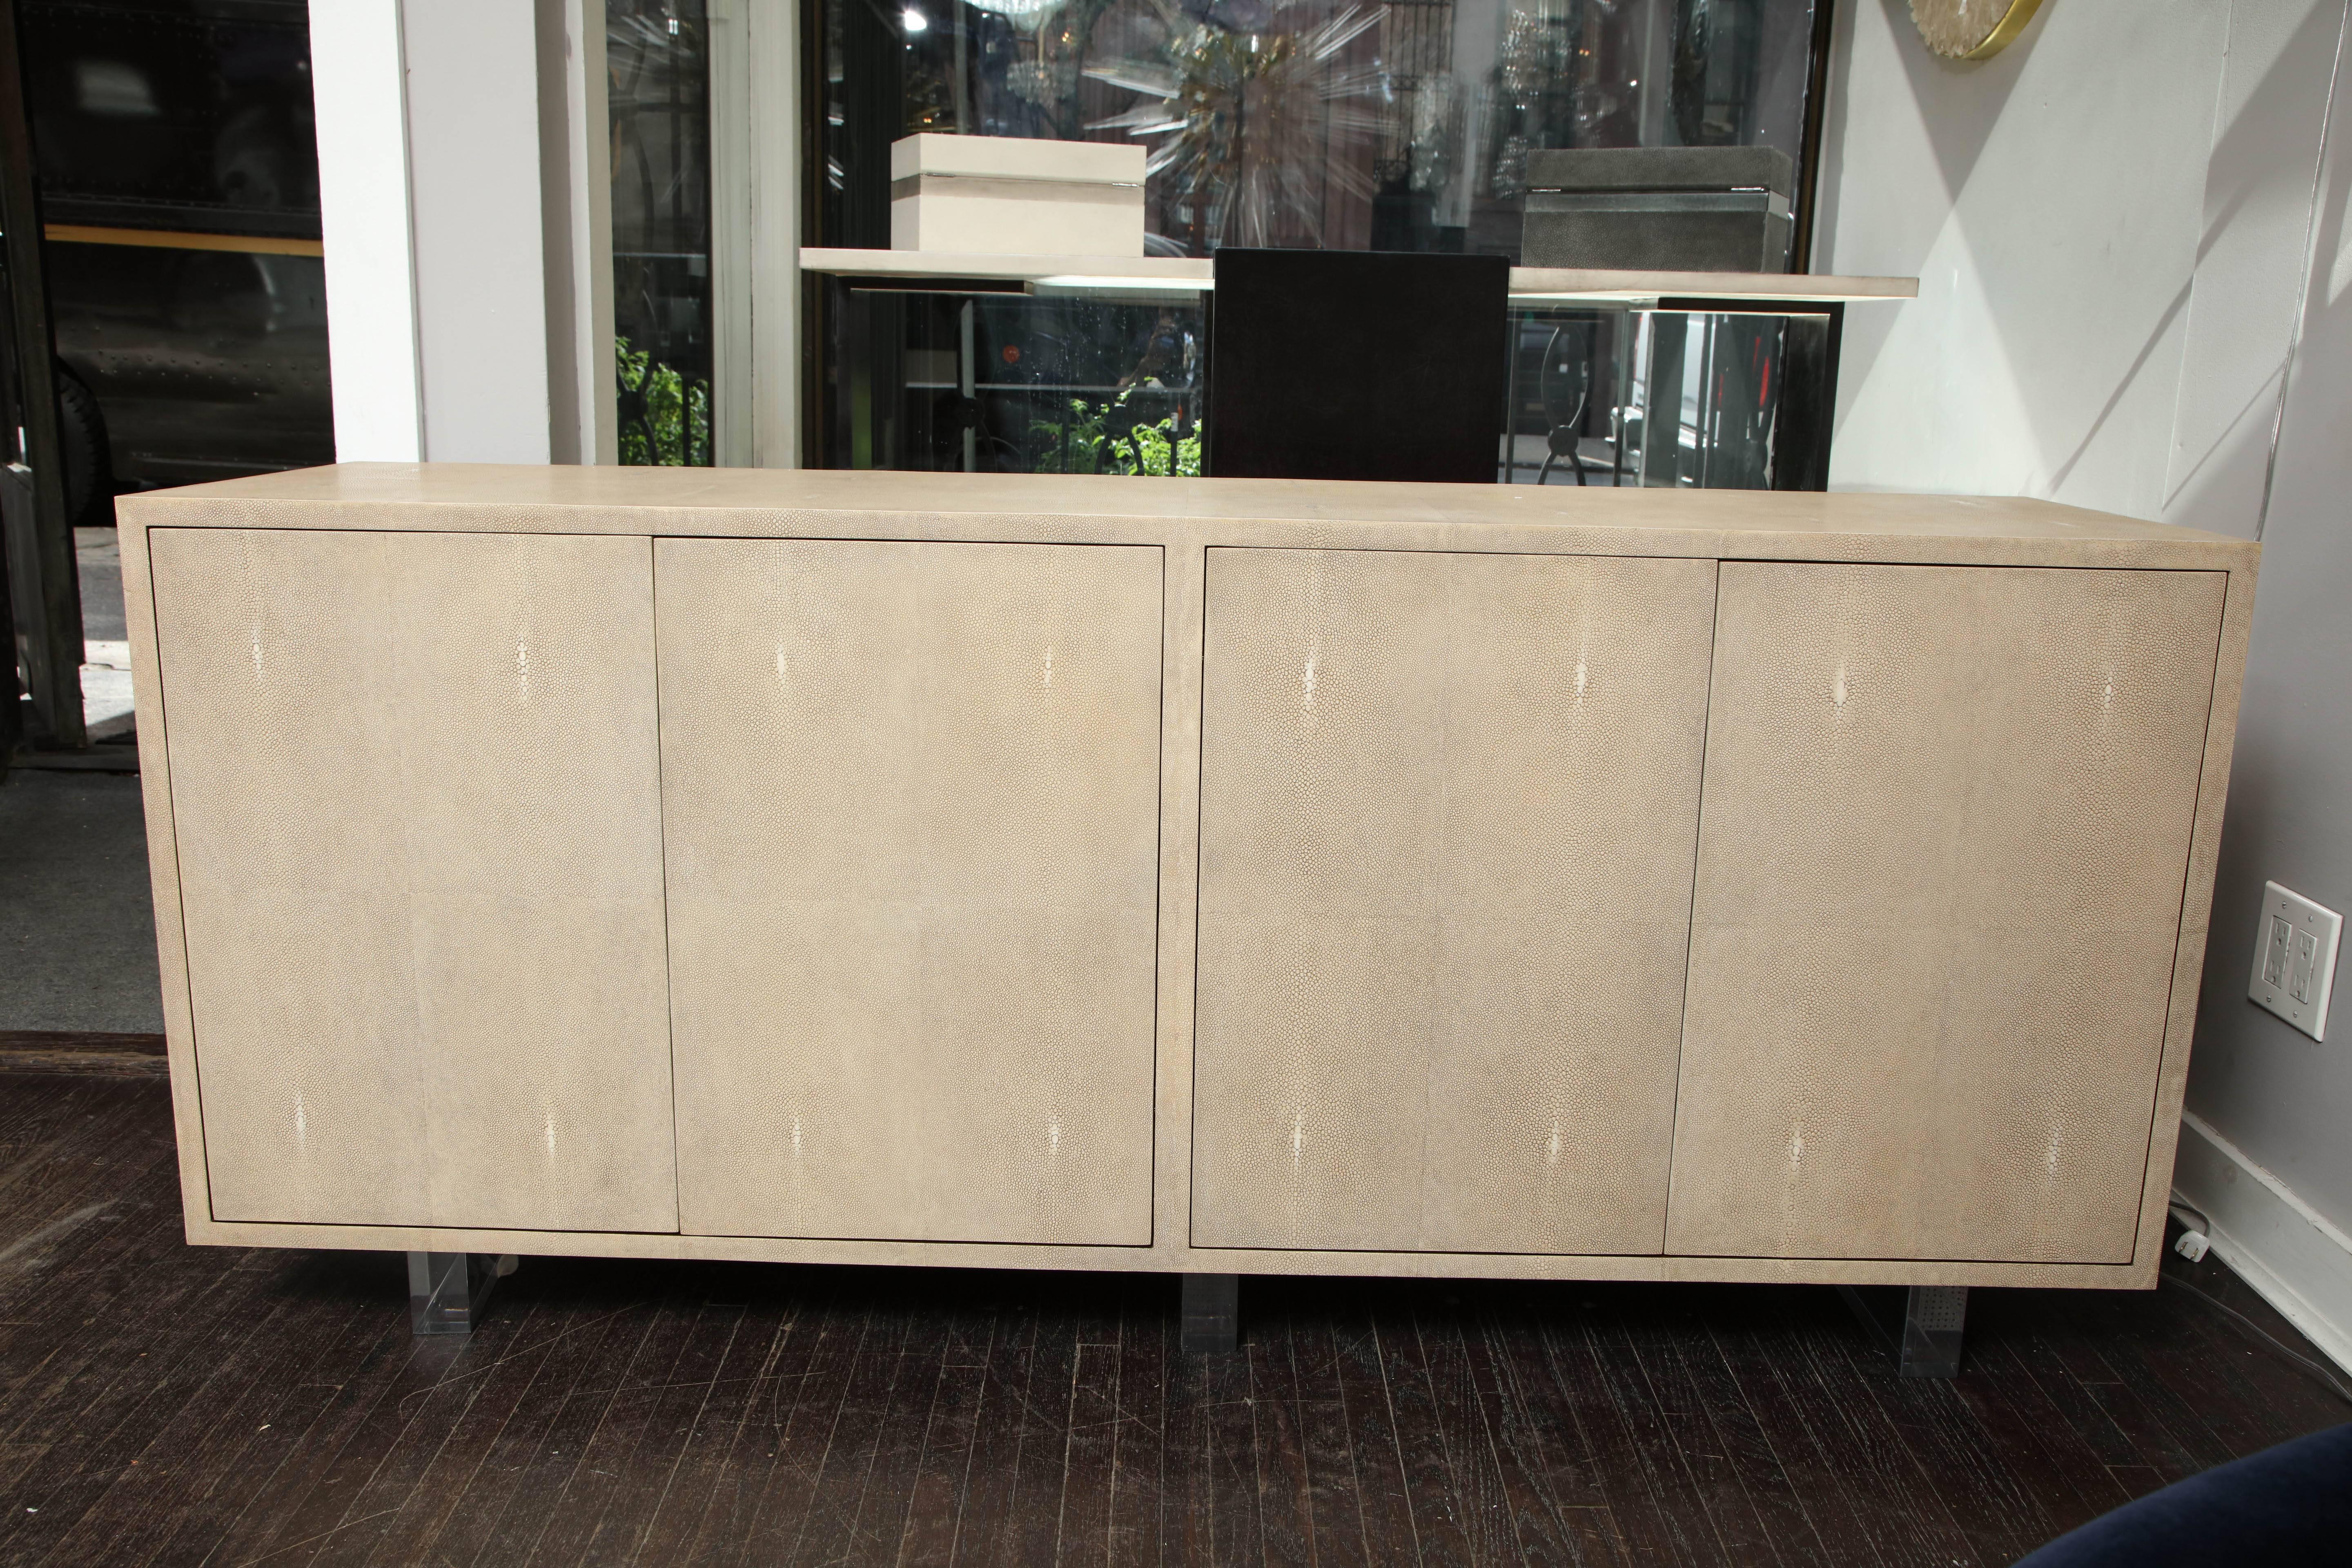 Genuine shagreen sideboard floating on acrylic base. Customization is available in different sizes and colors.